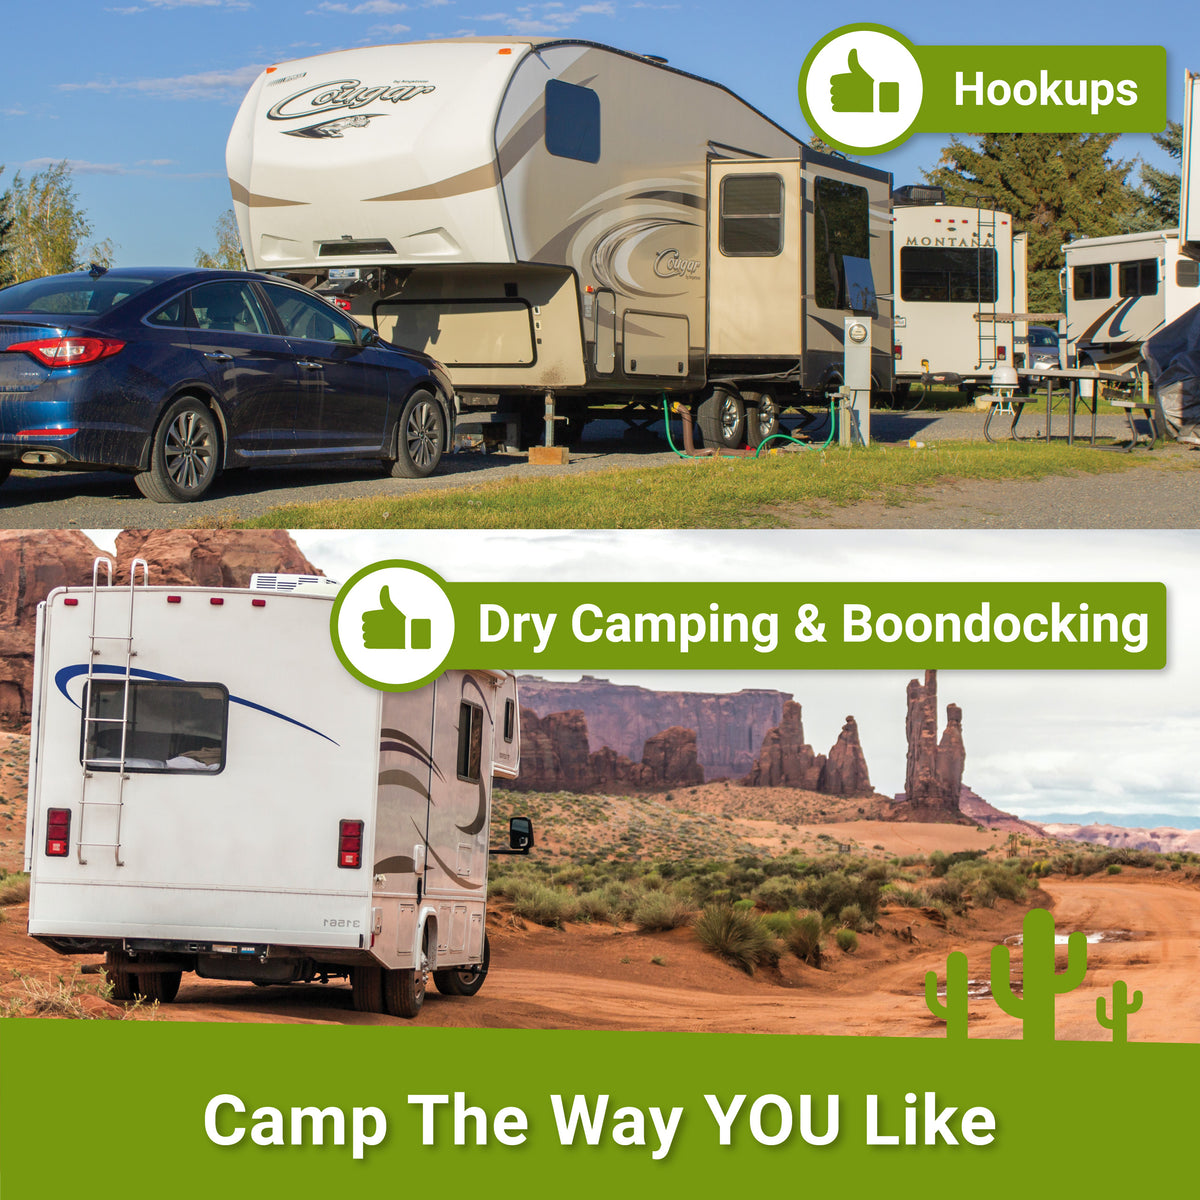 Camp the way you like! Dry camp or on full hook-ups using RV digest-It for the best results.